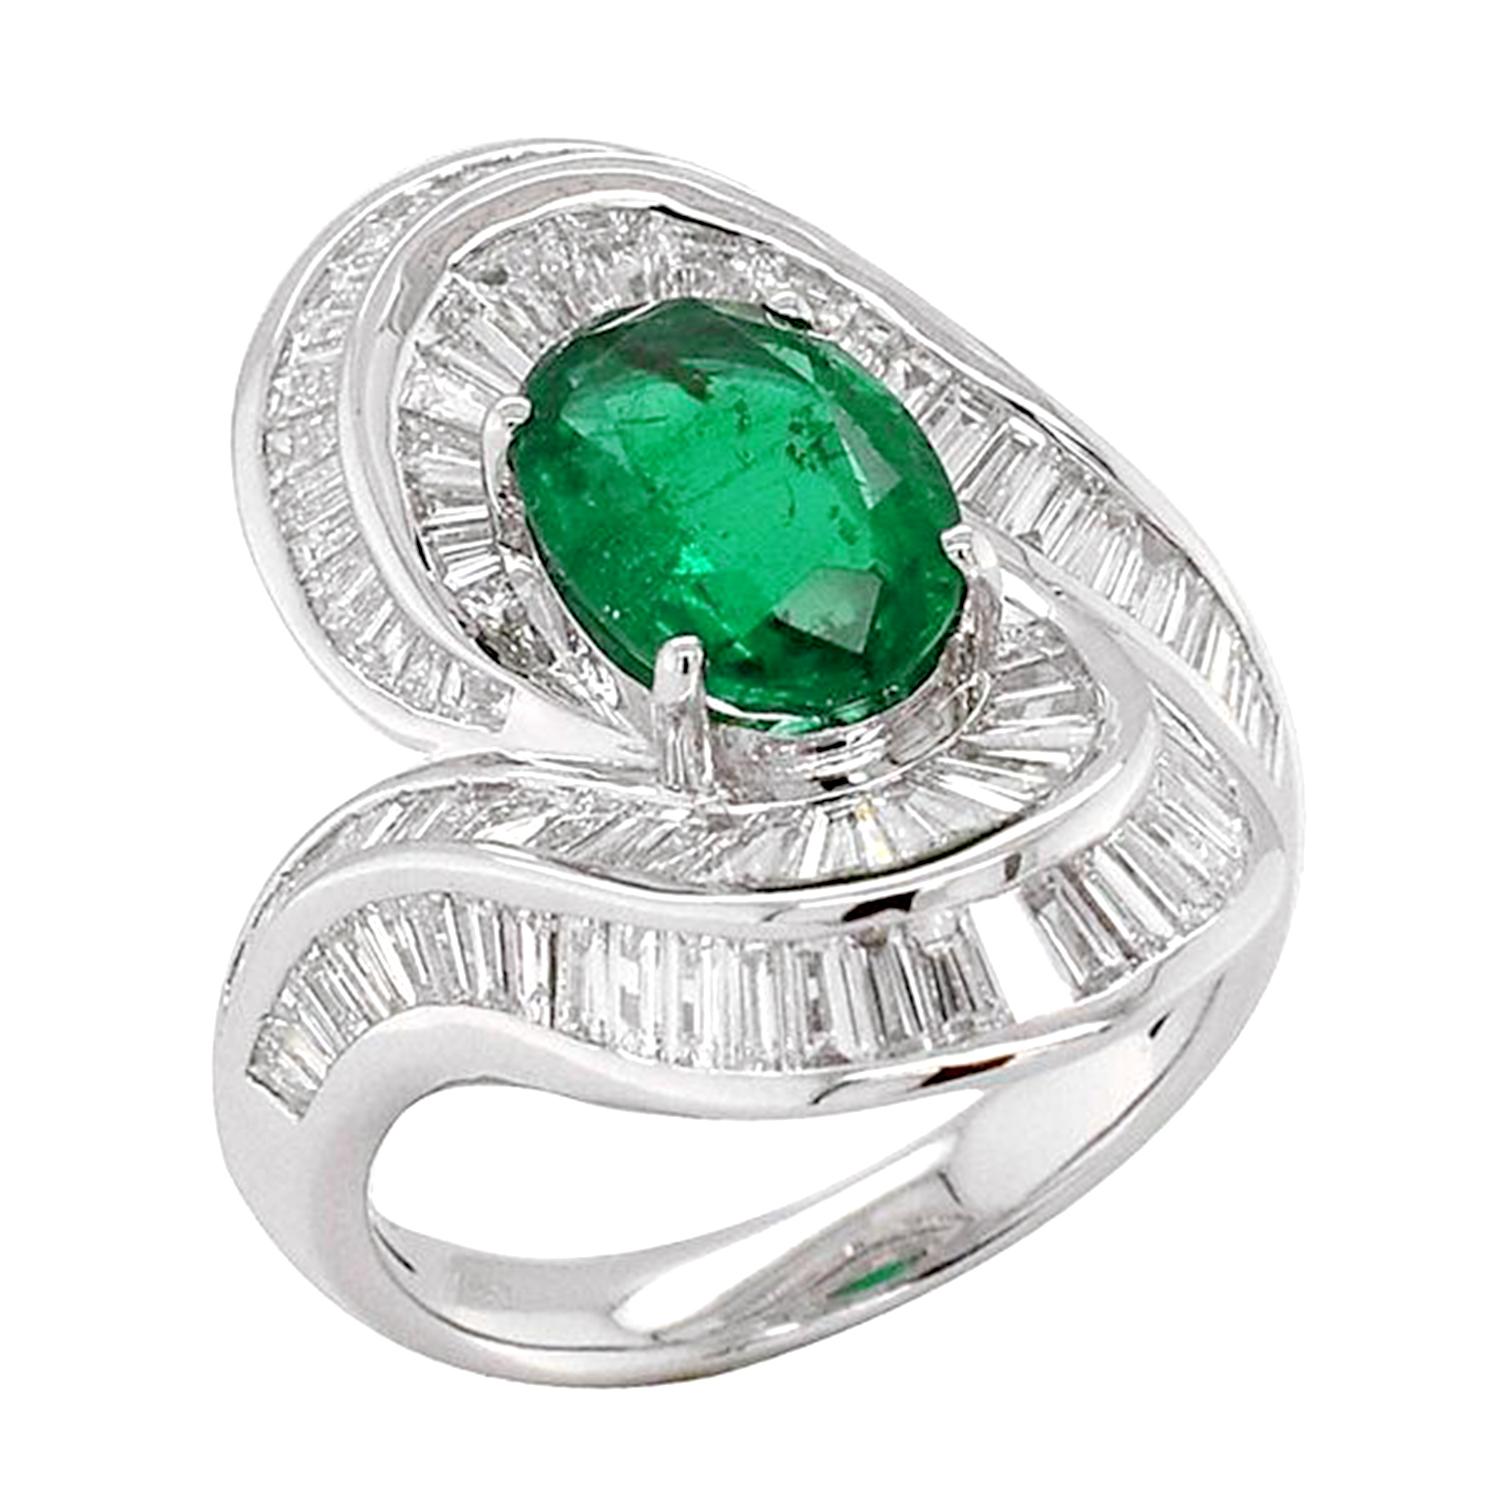 Mixed Cut Vintage Style Emerald Ring With Diamonds In 18k White Gold For Sale